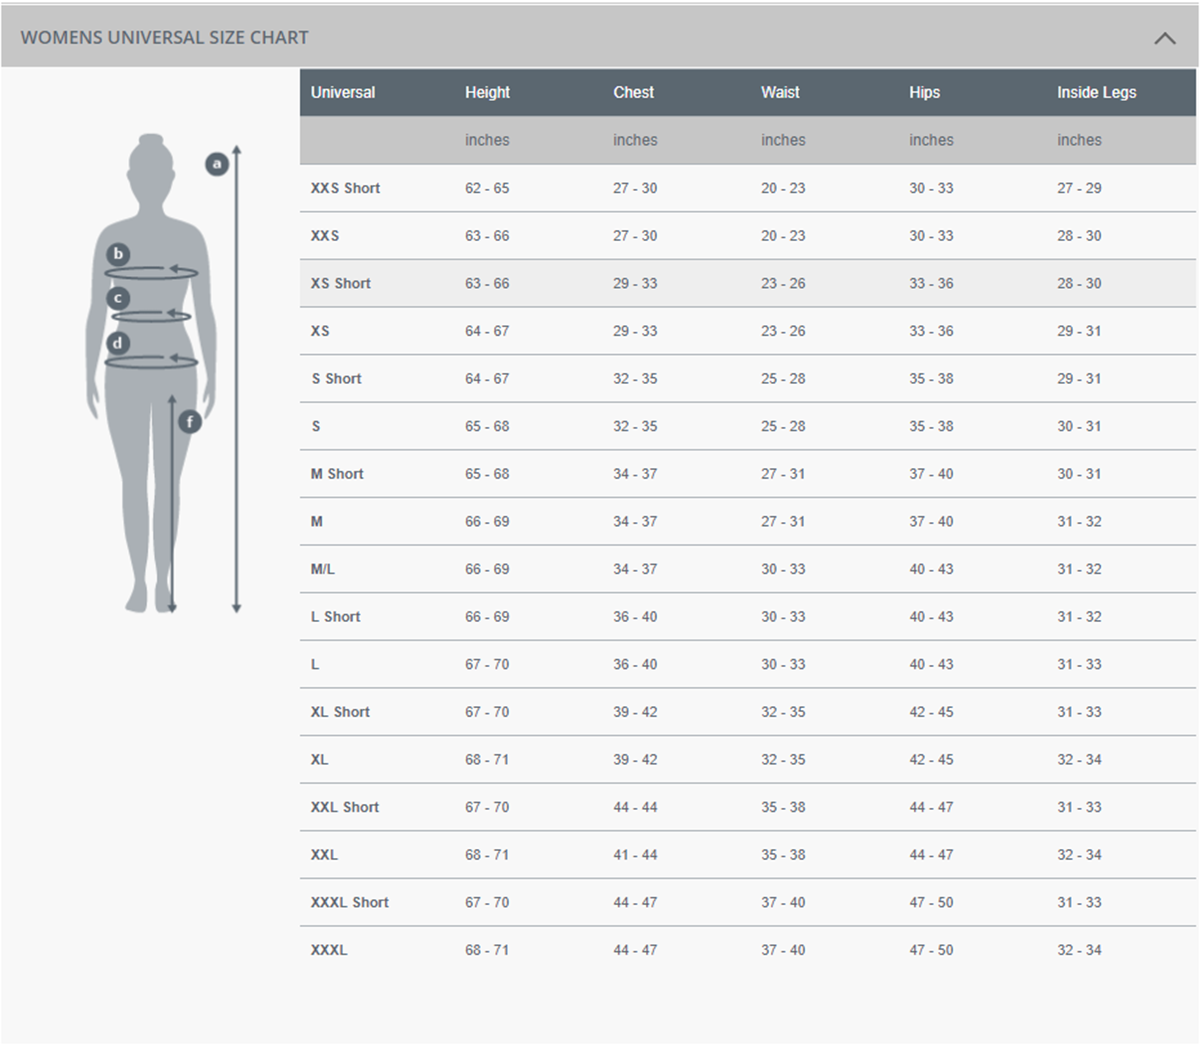 Female Size Chart for Women's Xenos 3mm Wetsuit